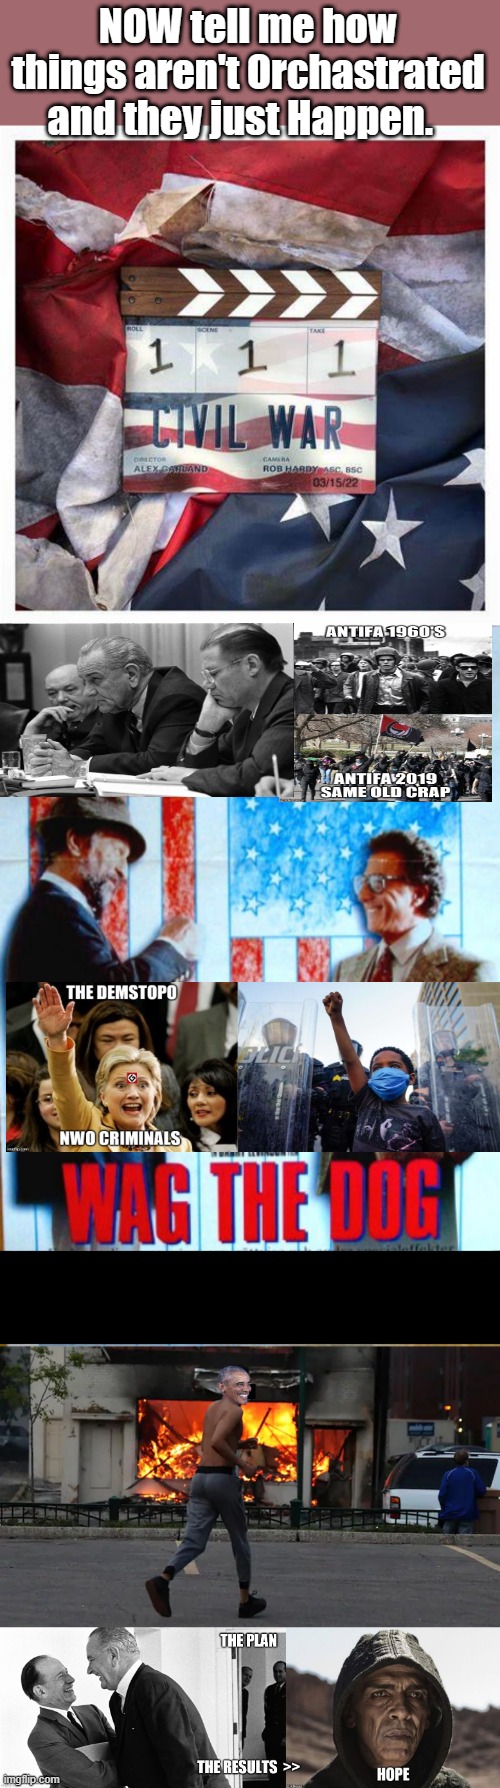 Look to the Past to see your Future. | NOW tell me how things aren't Orchastrated and they just Happen. | image tagged in nwo,democrats,war | made w/ Imgflip meme maker